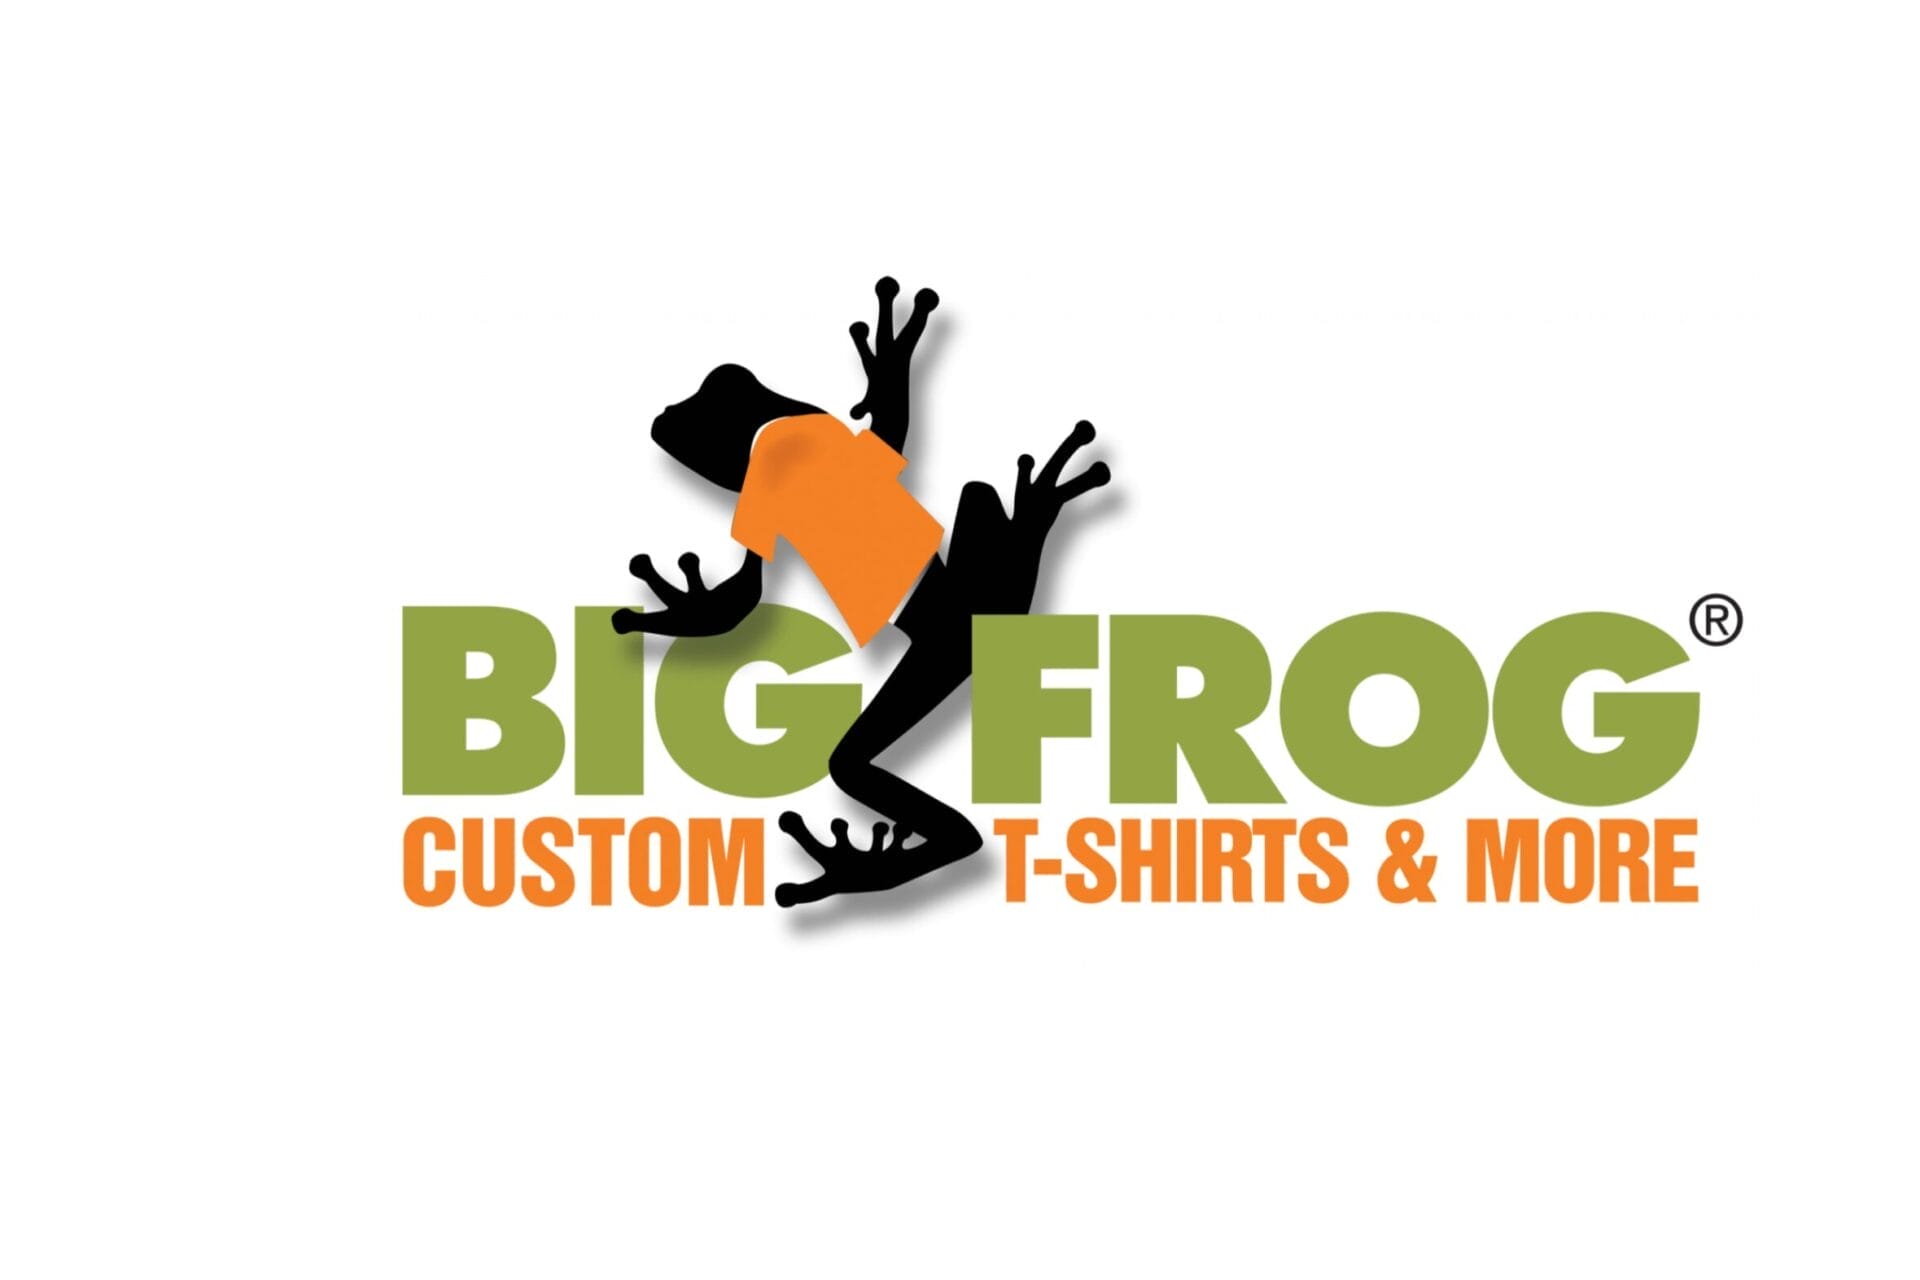 Logo for Big Frog featuring a silhouette of a frog wearing an orange t-shirt, with the text "Big Frog" in green and "Custom T-Shirts & More" in orange.